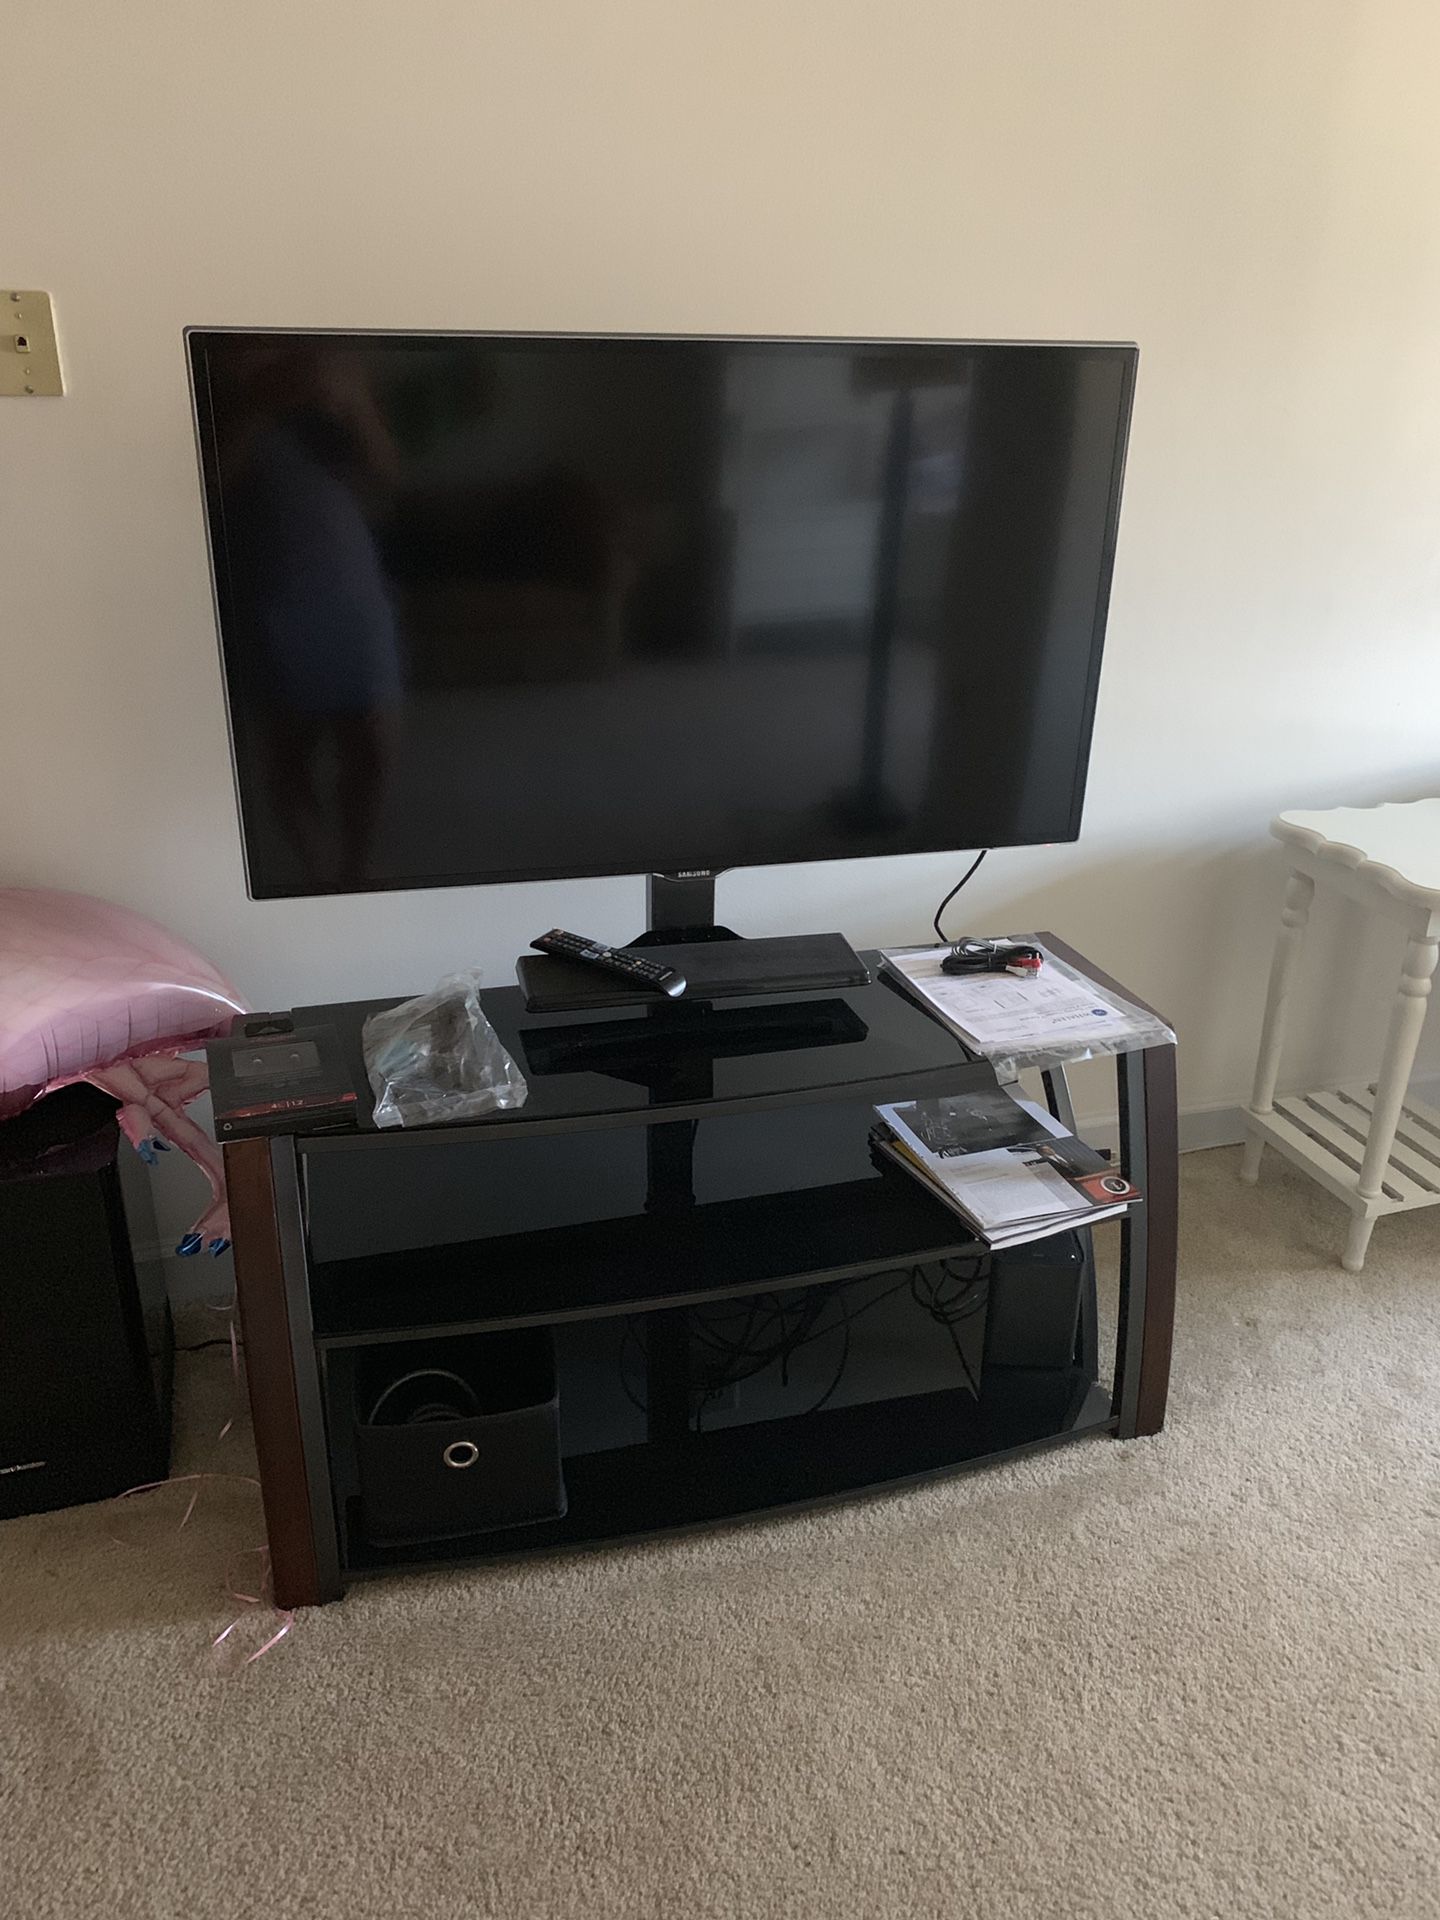 Samsung 3D smart tv 46 with stand